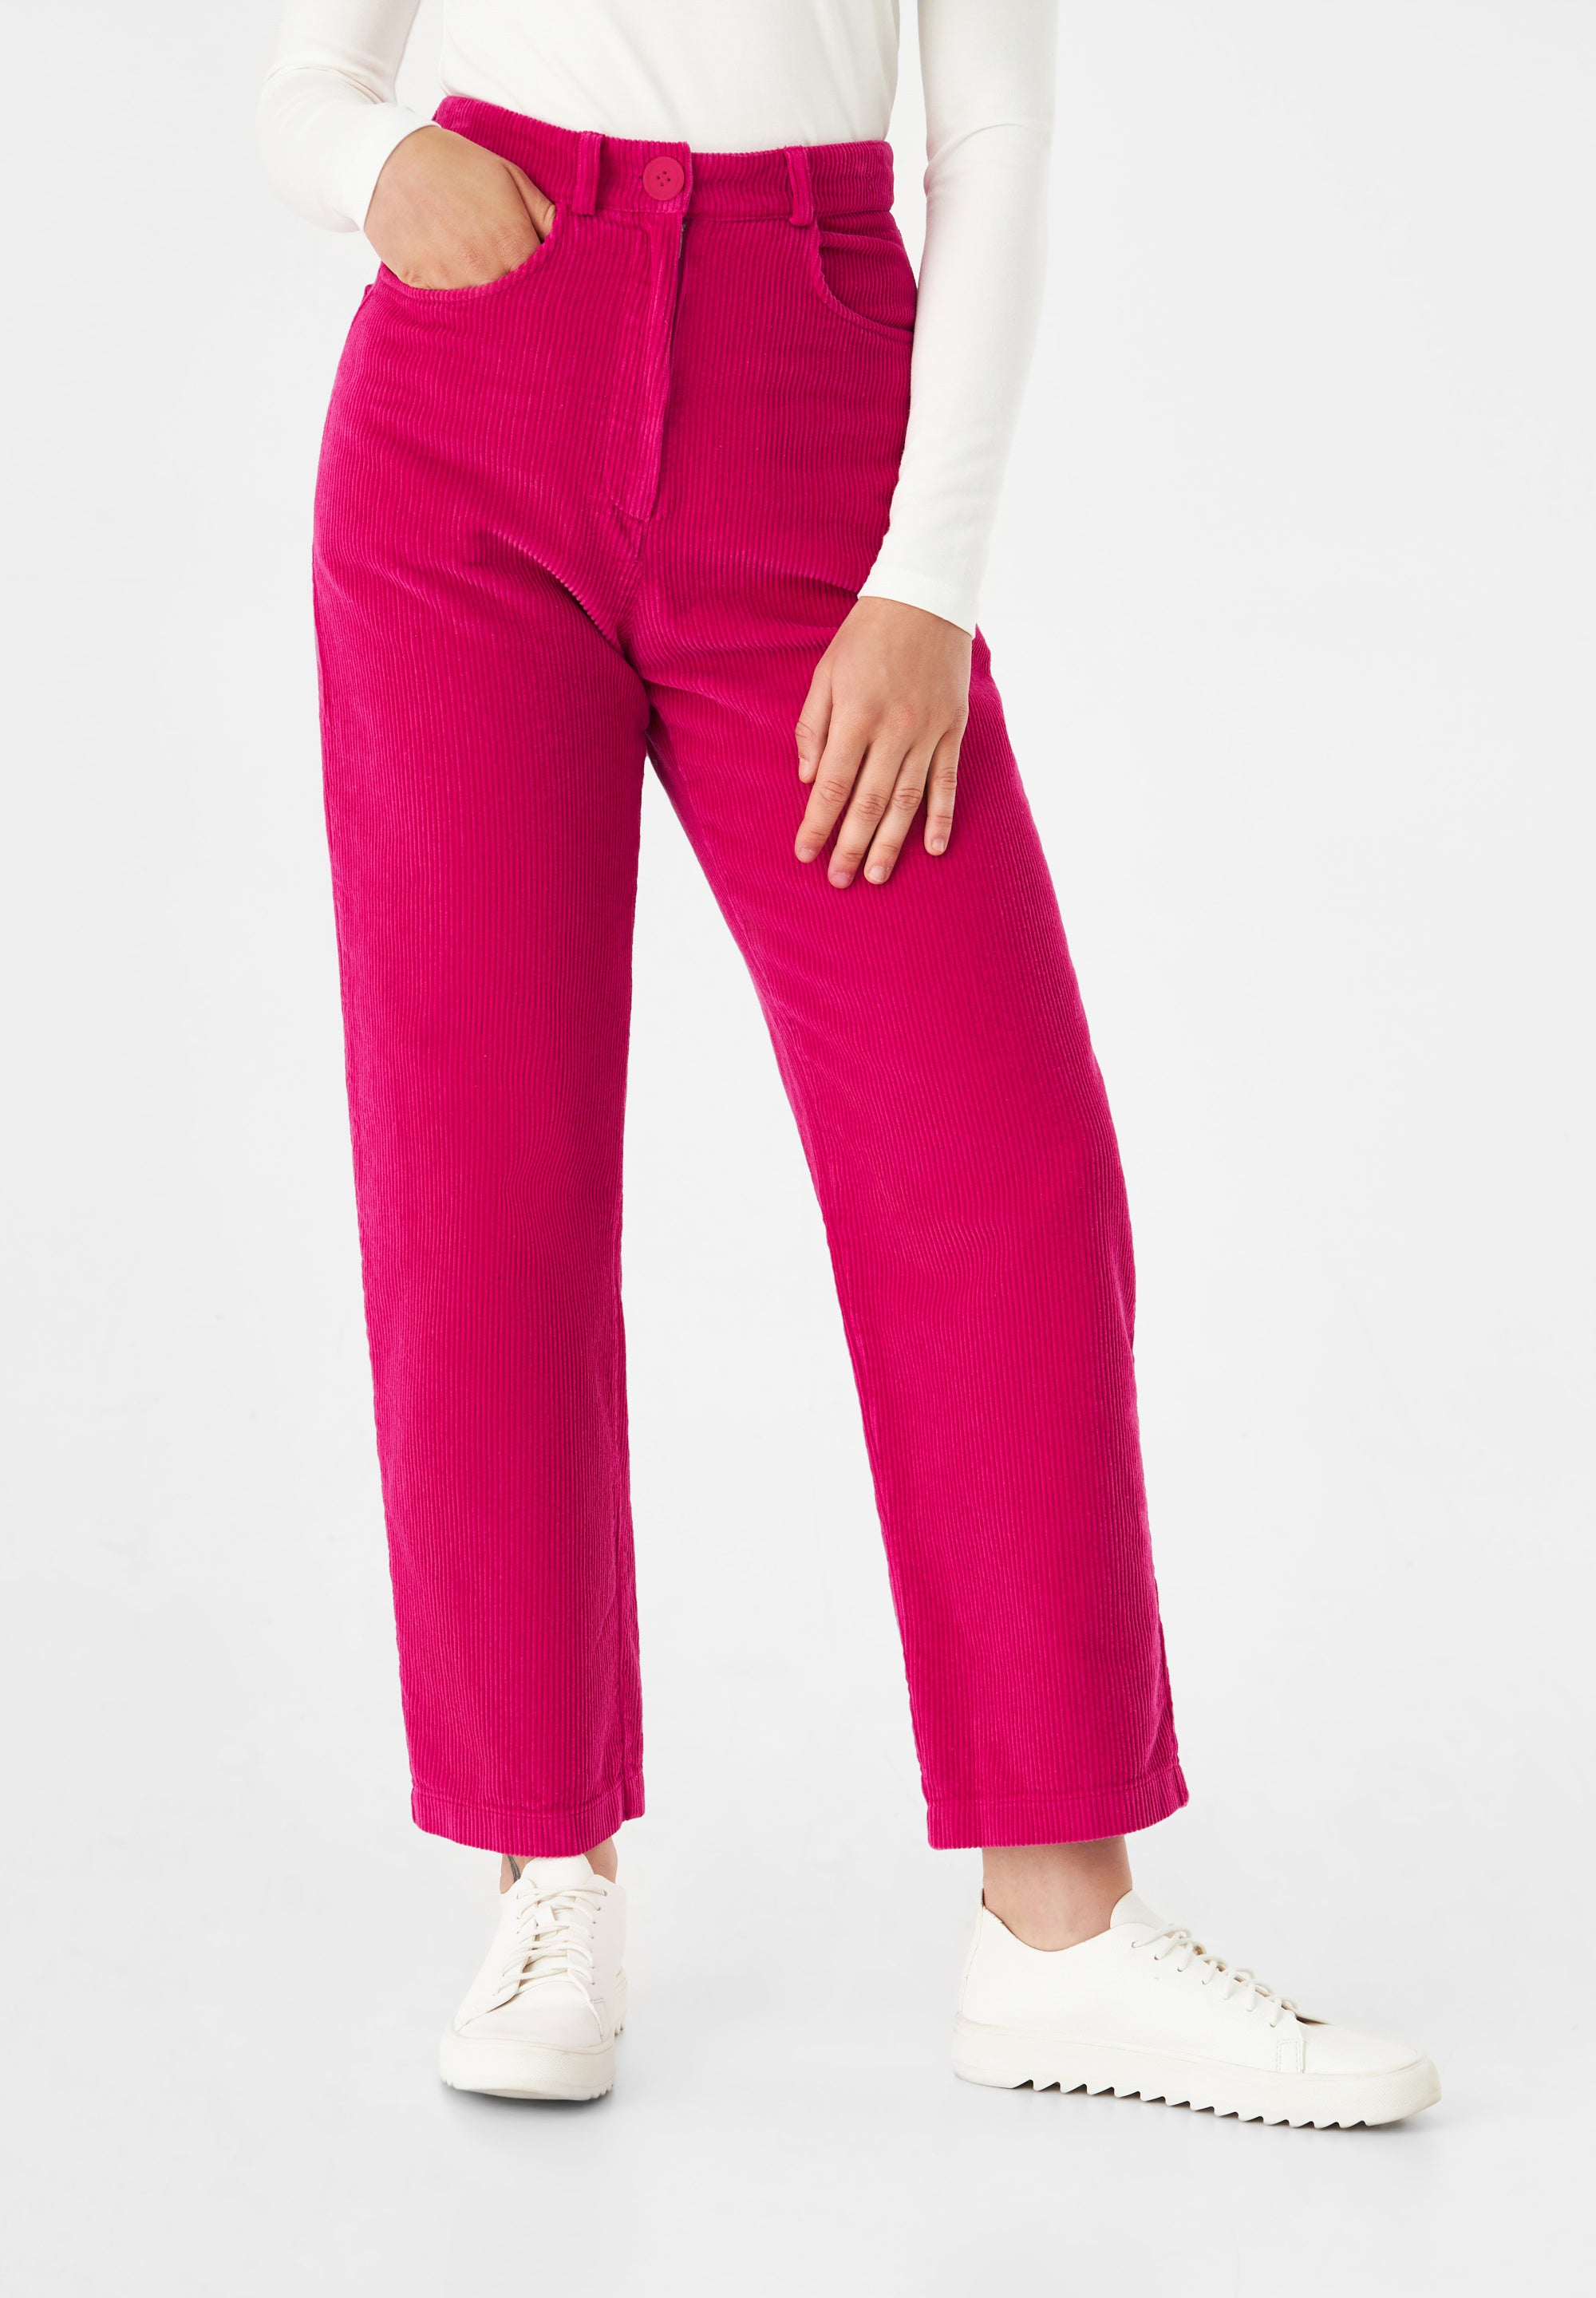 Givn Berlin Cordhose CLAIRE aus Bio-Baumwolle Trousers Berry Pink (Cord)